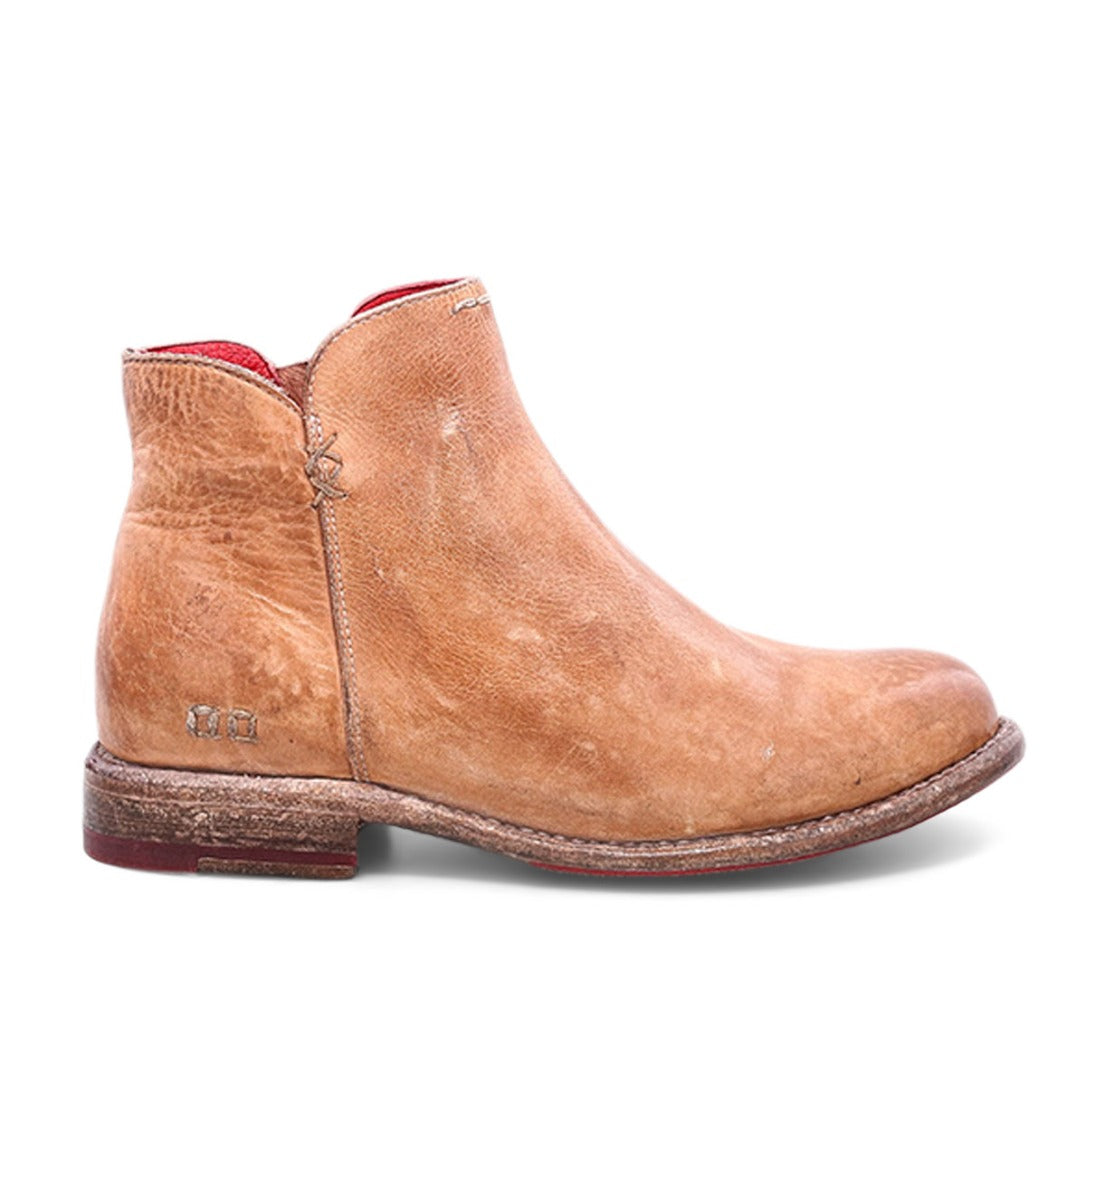 A women's Yurisa tan leather ankle boot by Bed Stu.